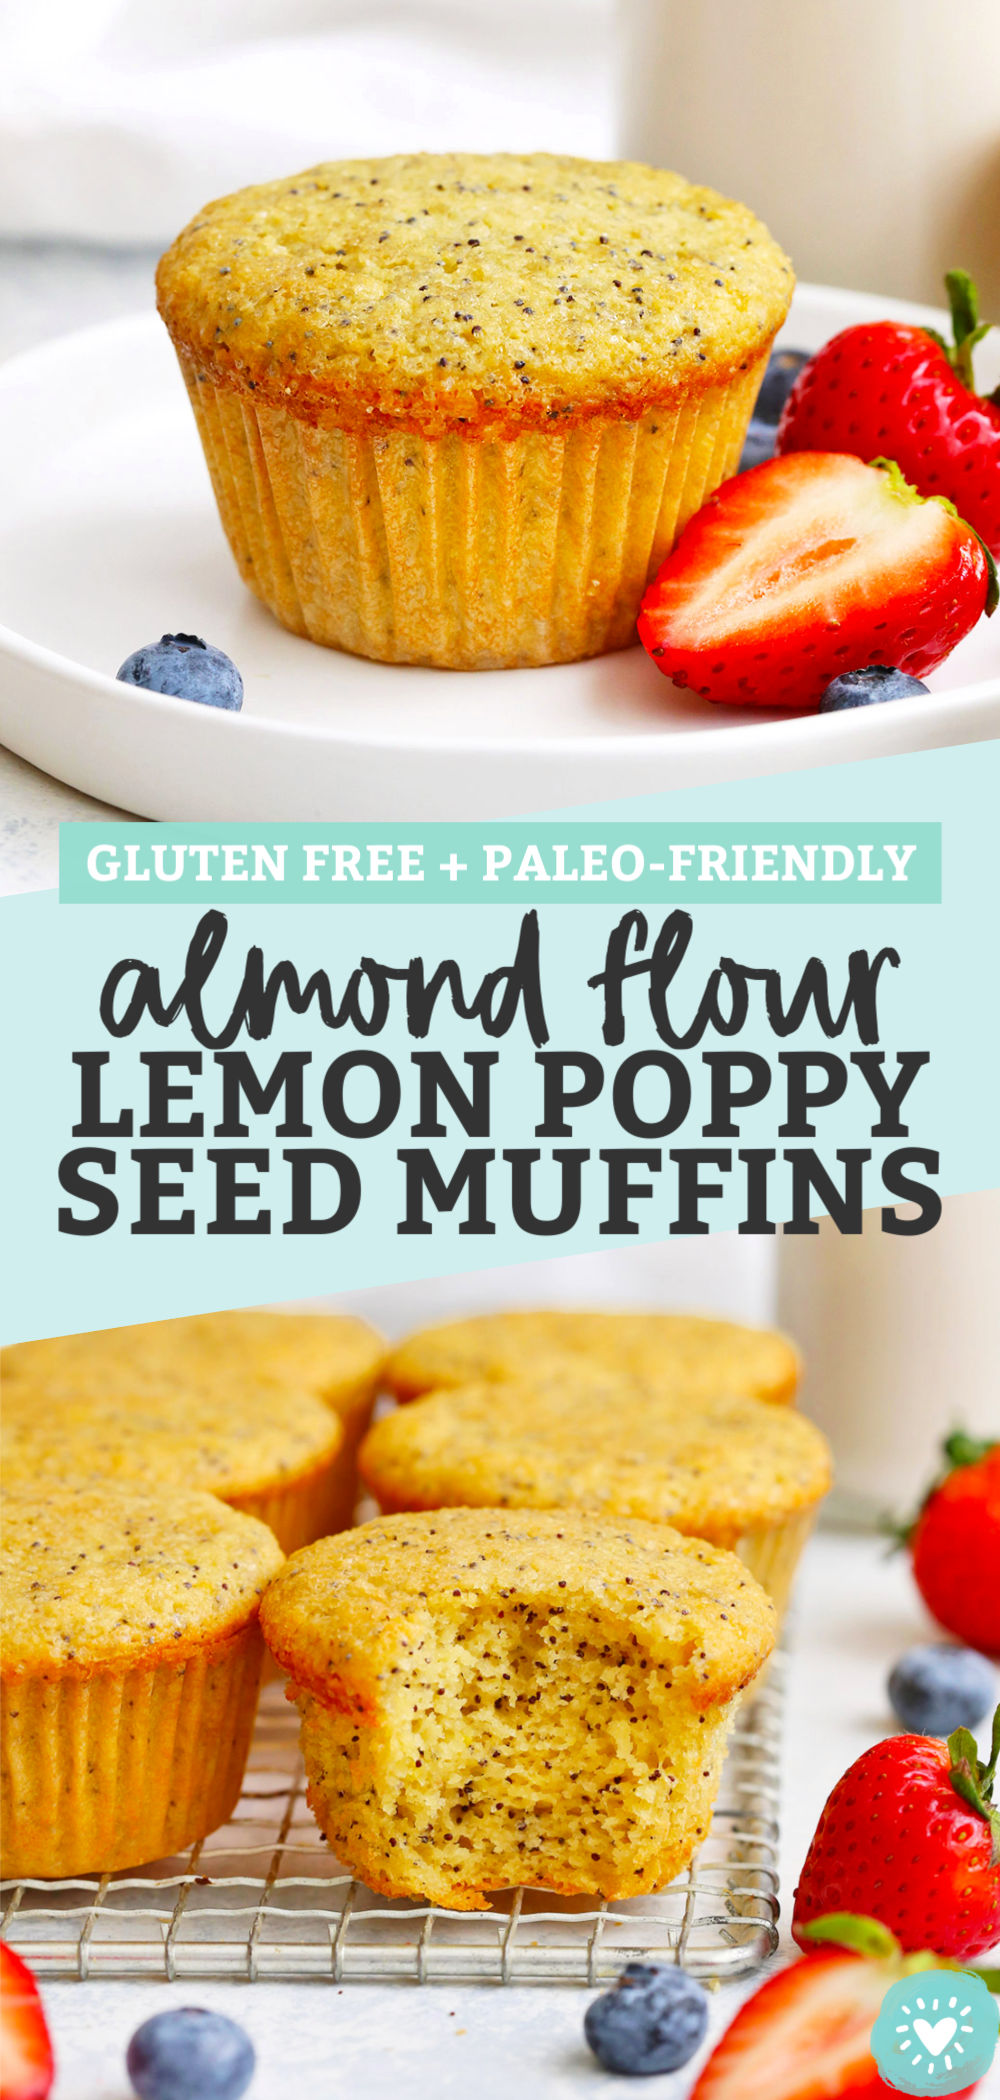 Almond Flour Lemon Poppy Seed Muffins - These gluten-free lemon poppy seed muffins have a light, fluffy texture and are BURSTING with lemon flavor. They're the perfect yummy breakfast or snack! // Paleo Lemon Poppy Seed Muffins // Gluten Free Lemon Poppy Seed Muffins #muffins #almondflour #lemon #poppyseed #paleo #glutenfree